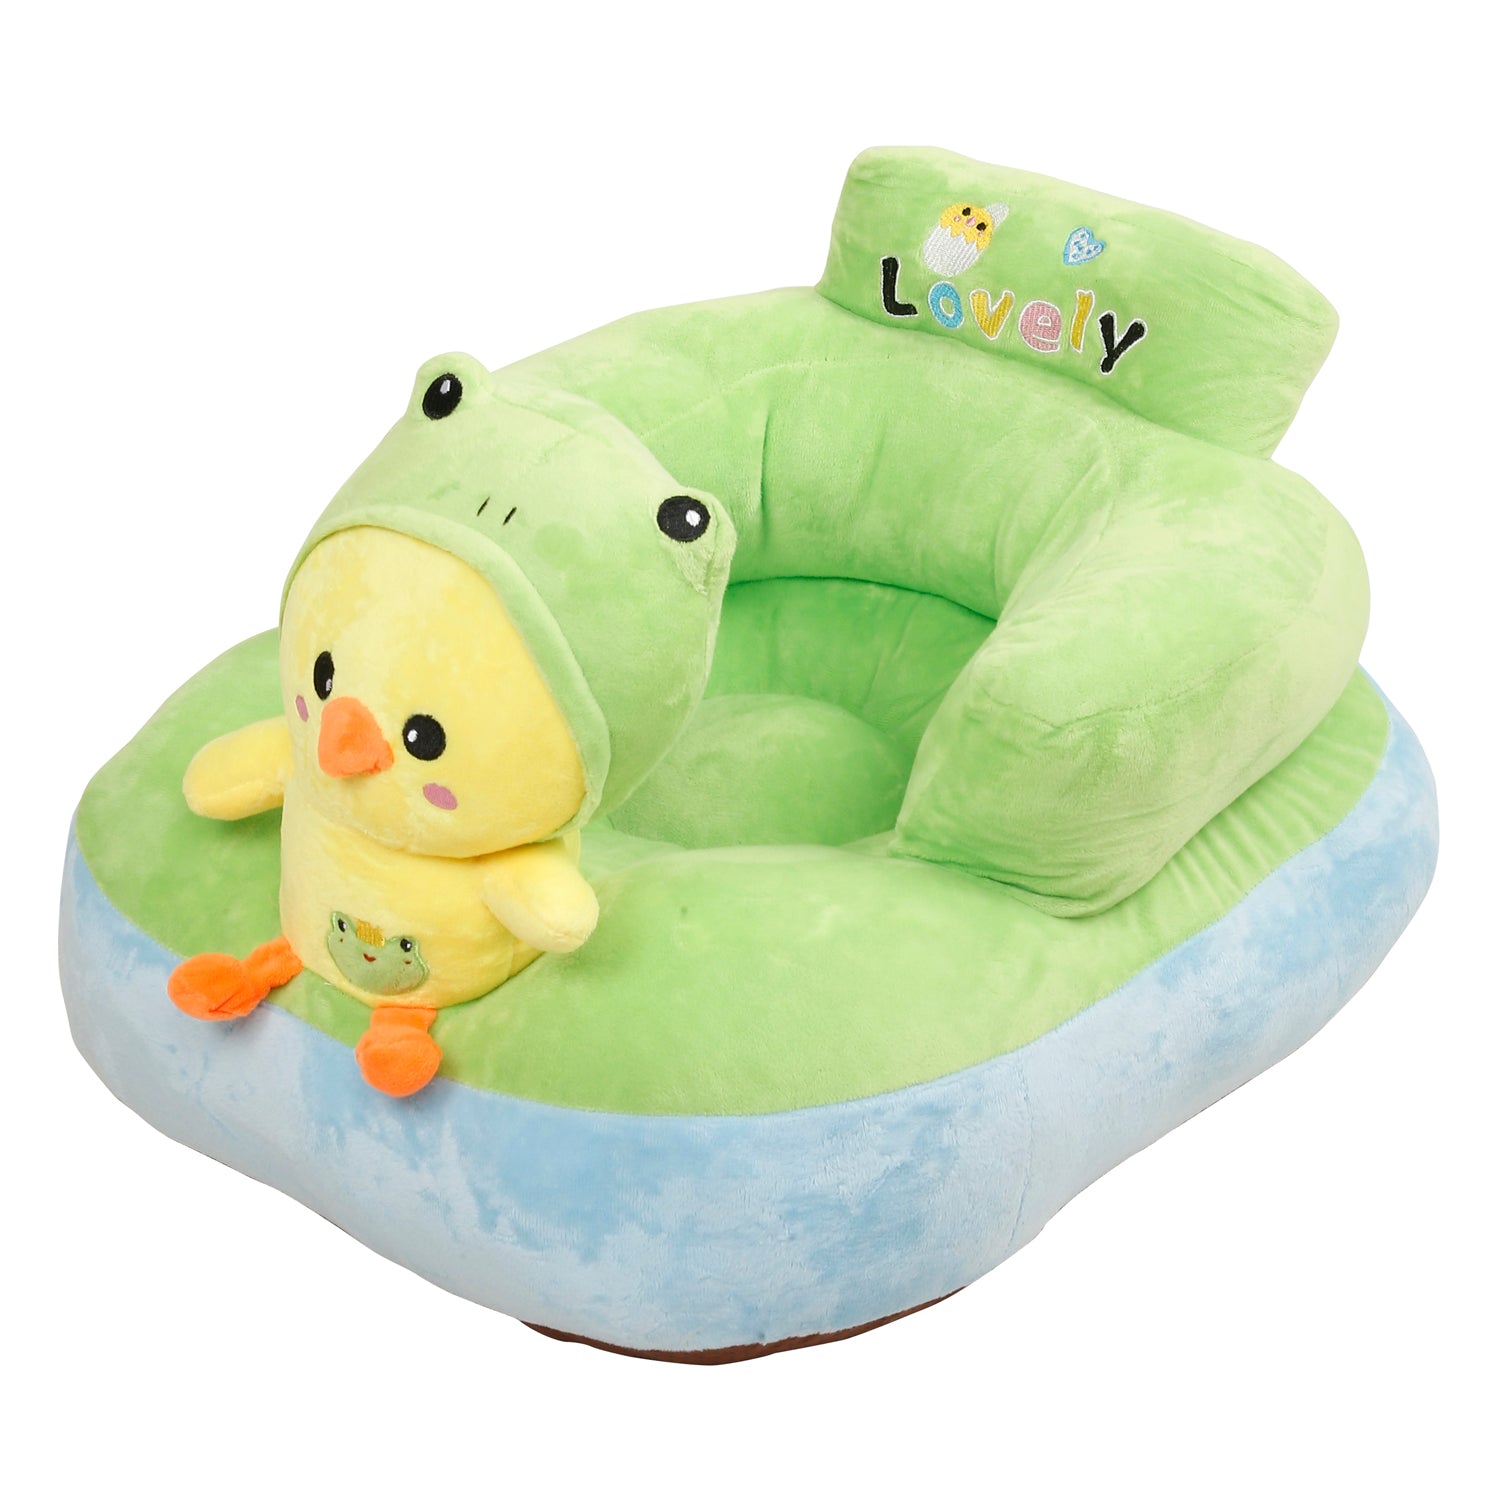 Relaxing With Duck Green Sofa - Baby Moo